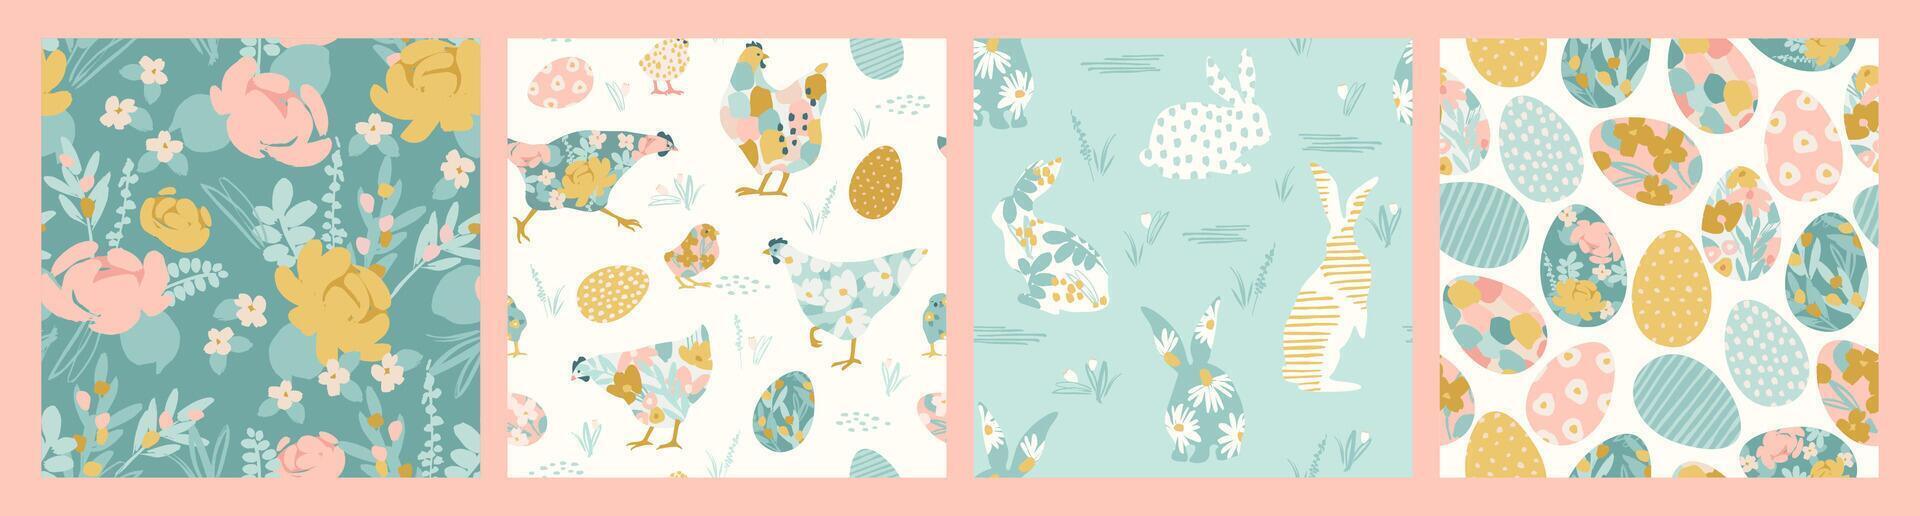 Happy Easter. Vector seamless patterns with abstract chickens, rabbits, eggs and flowers. Vector design templates